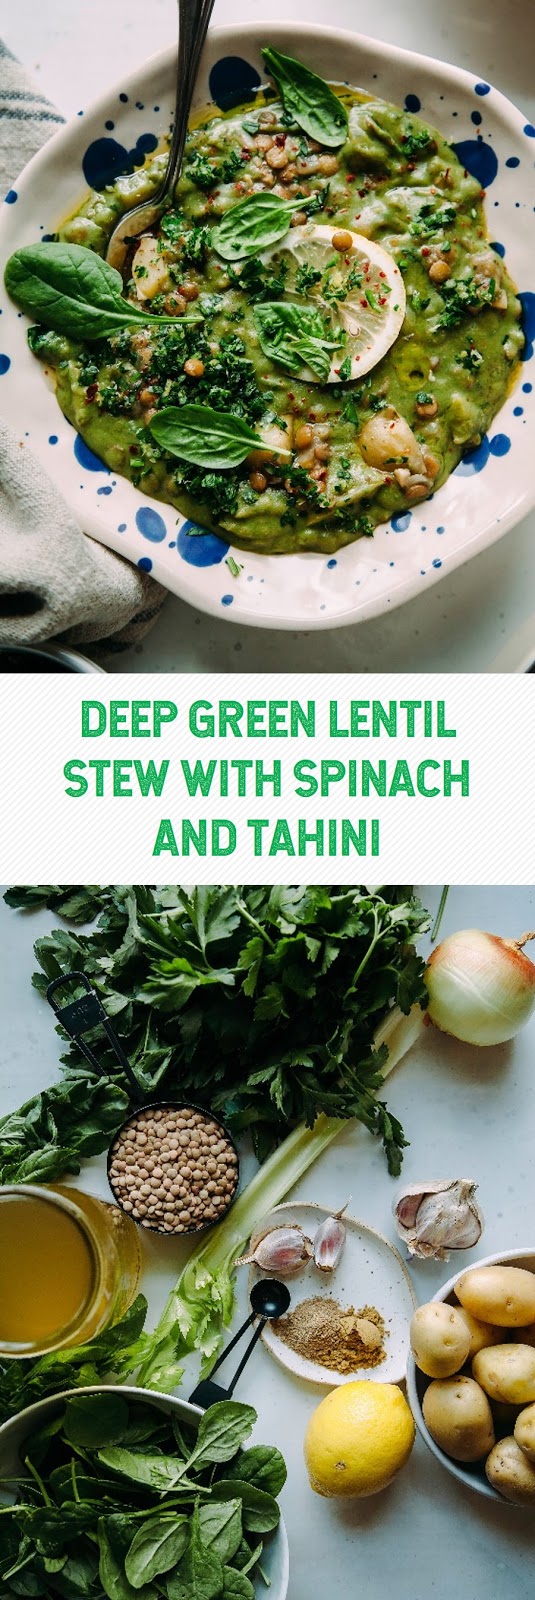 DEEP GREEN LENTIL STEW WITH SPINACH AND TAHINI